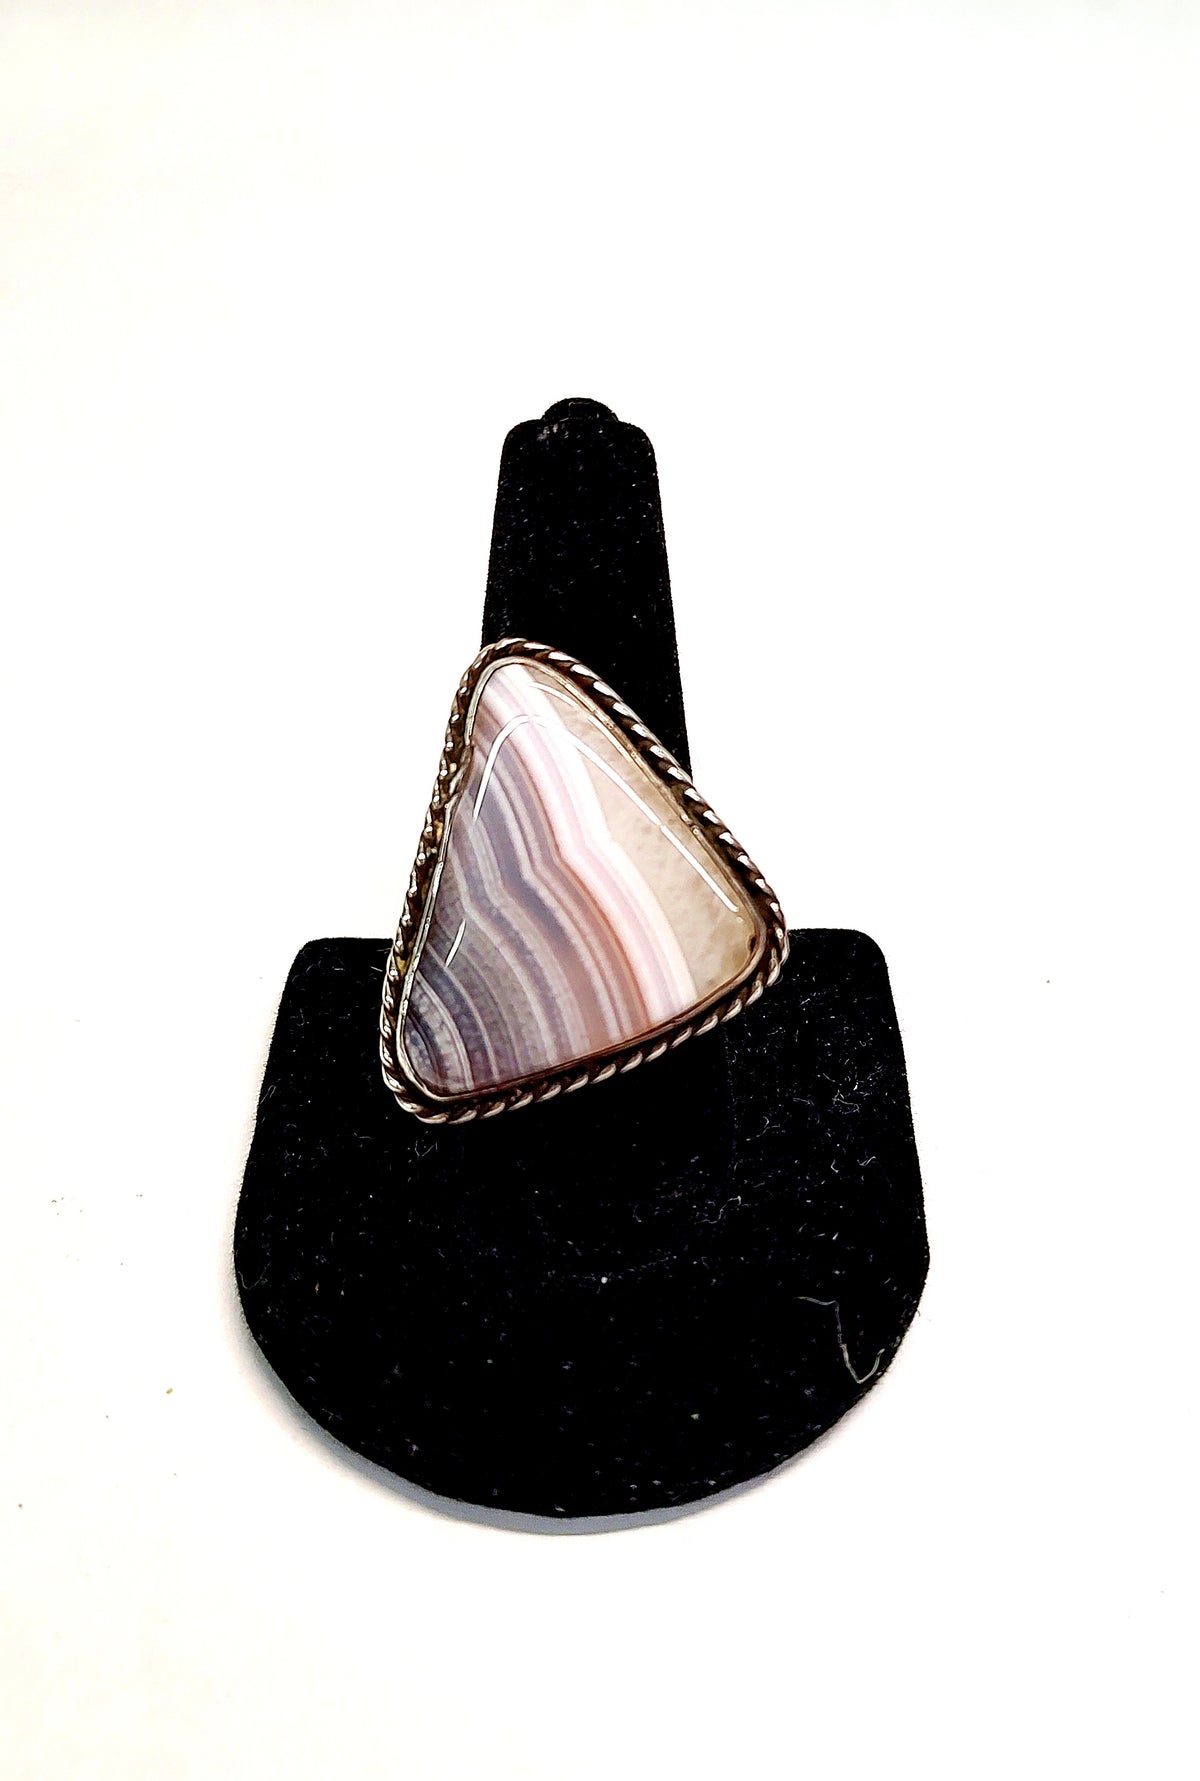 Triangular Cut Agate Sterling Silver Ring - Hers and His Treasures